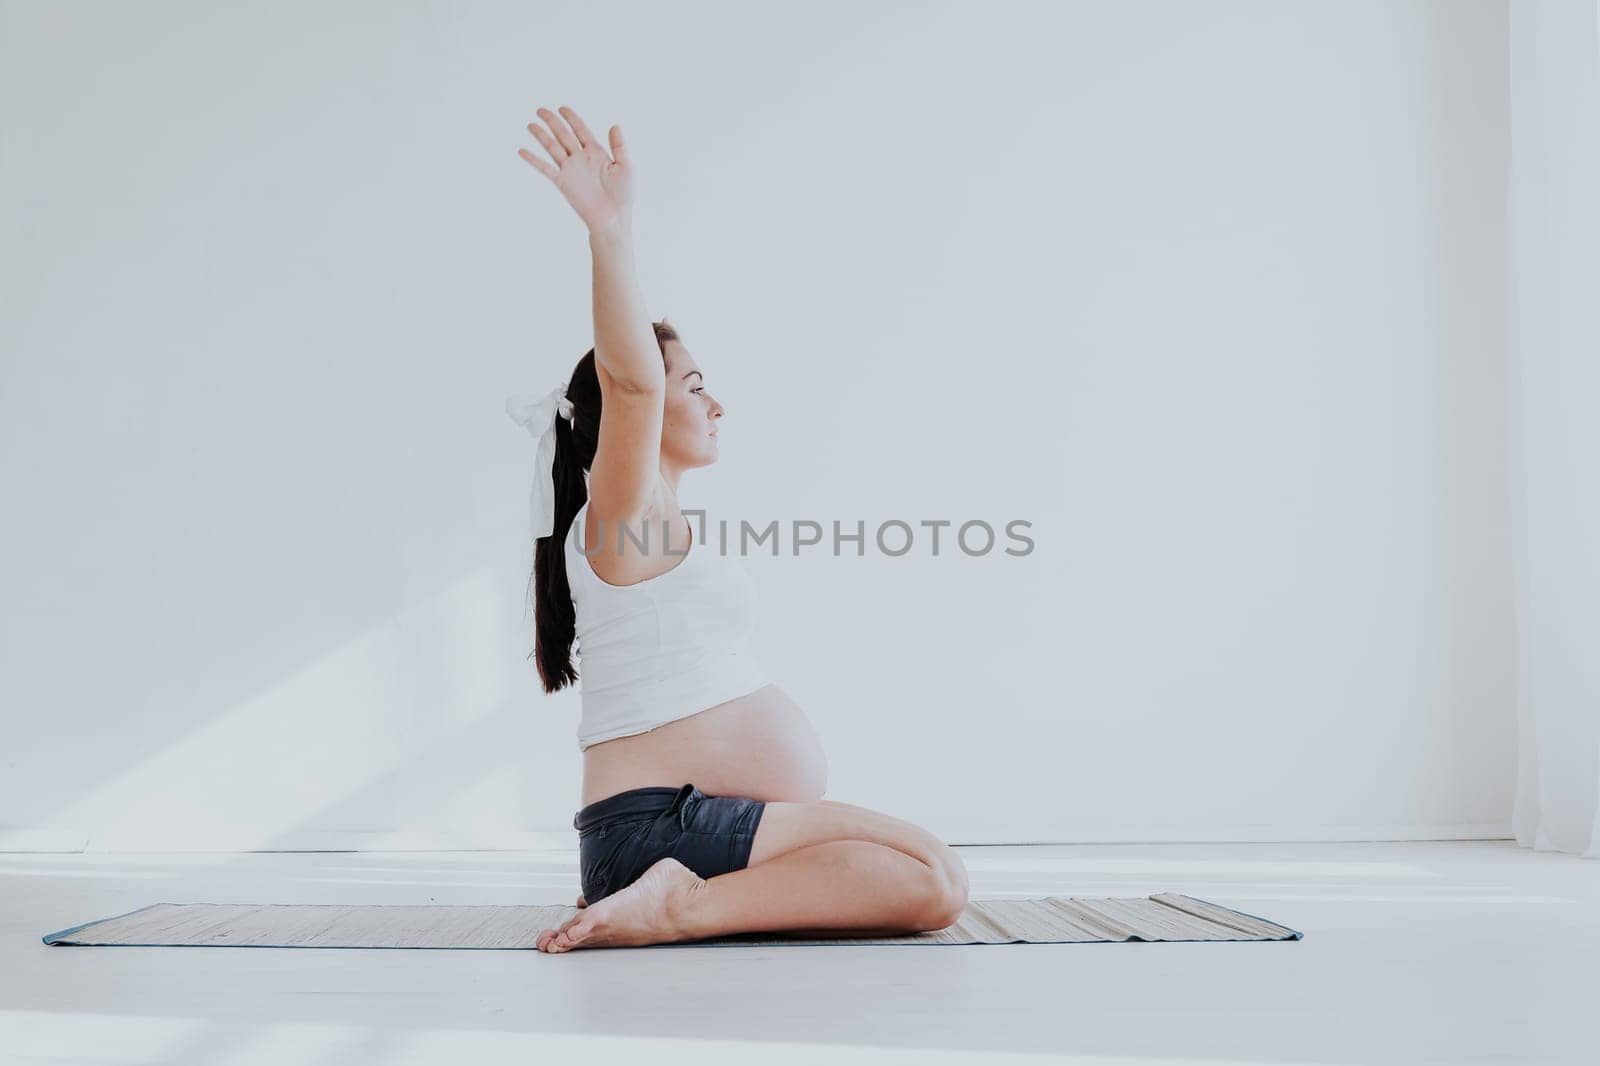 a pregnant woman is engaged in gymnastics and yoga childbirth